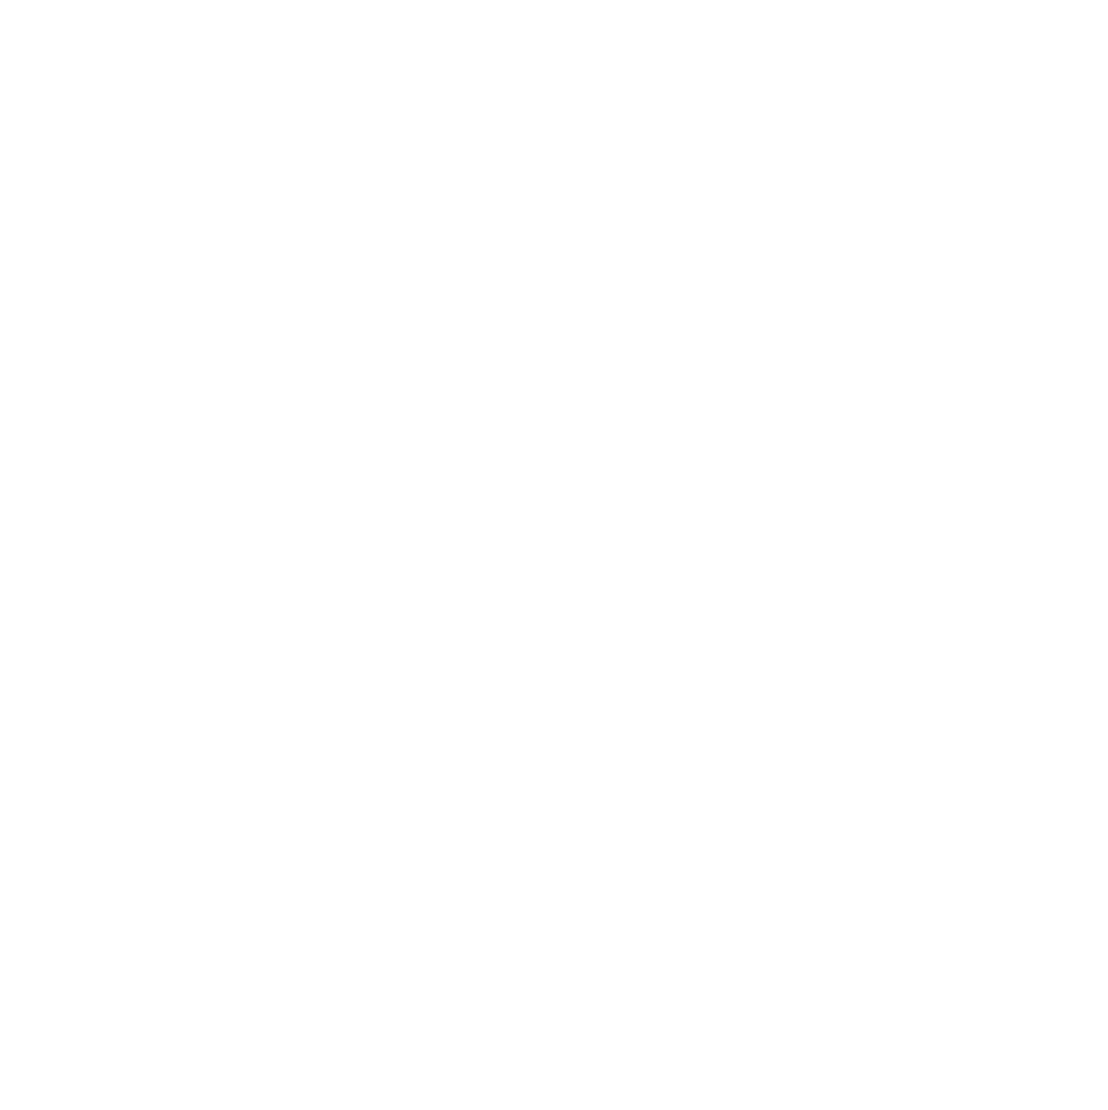 A graphic design of soybeans